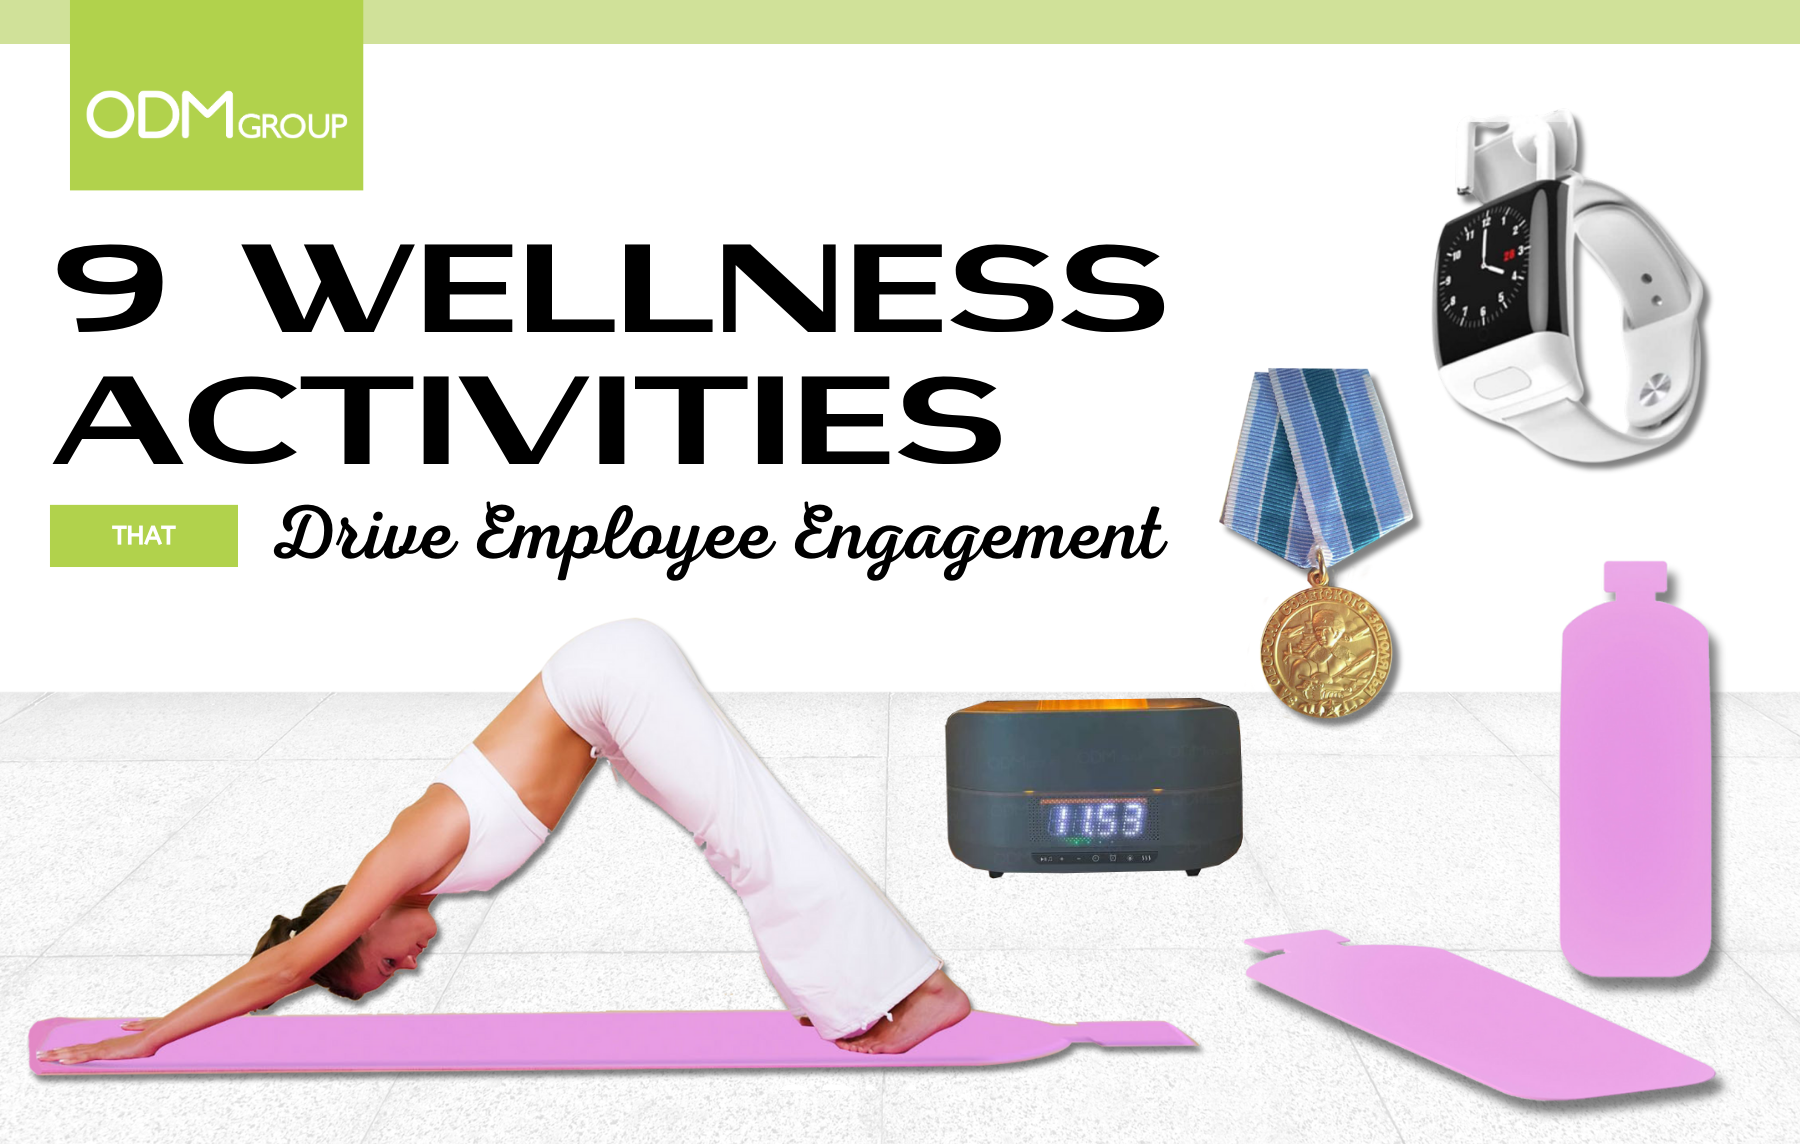 Wellness activities for employees featuring yoga mat, fitness tracker, and water bottle.